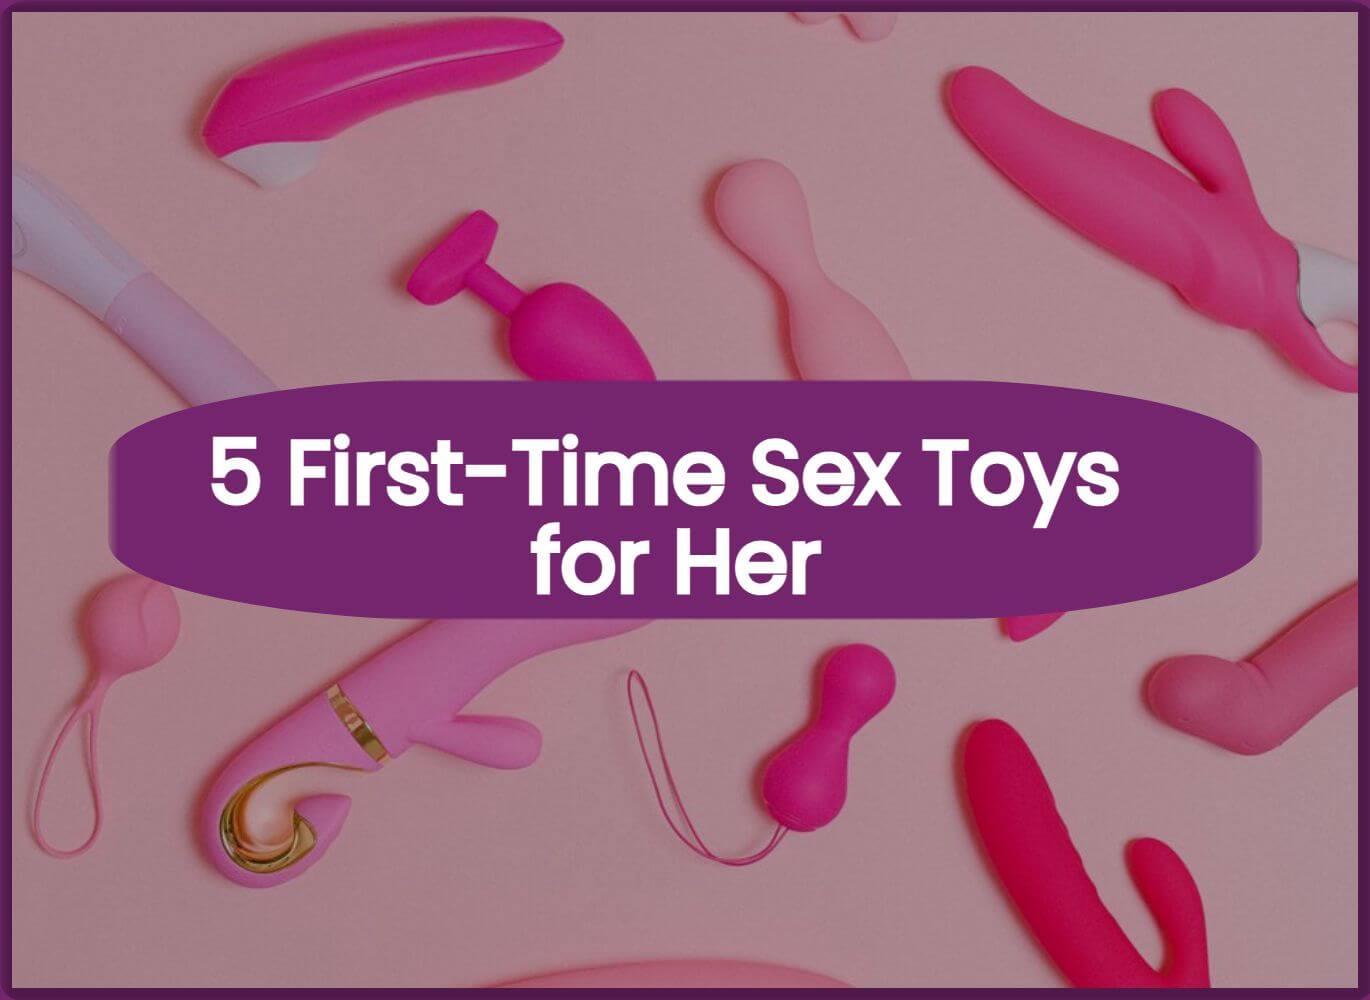 5 First-Time Sex Toys for Her